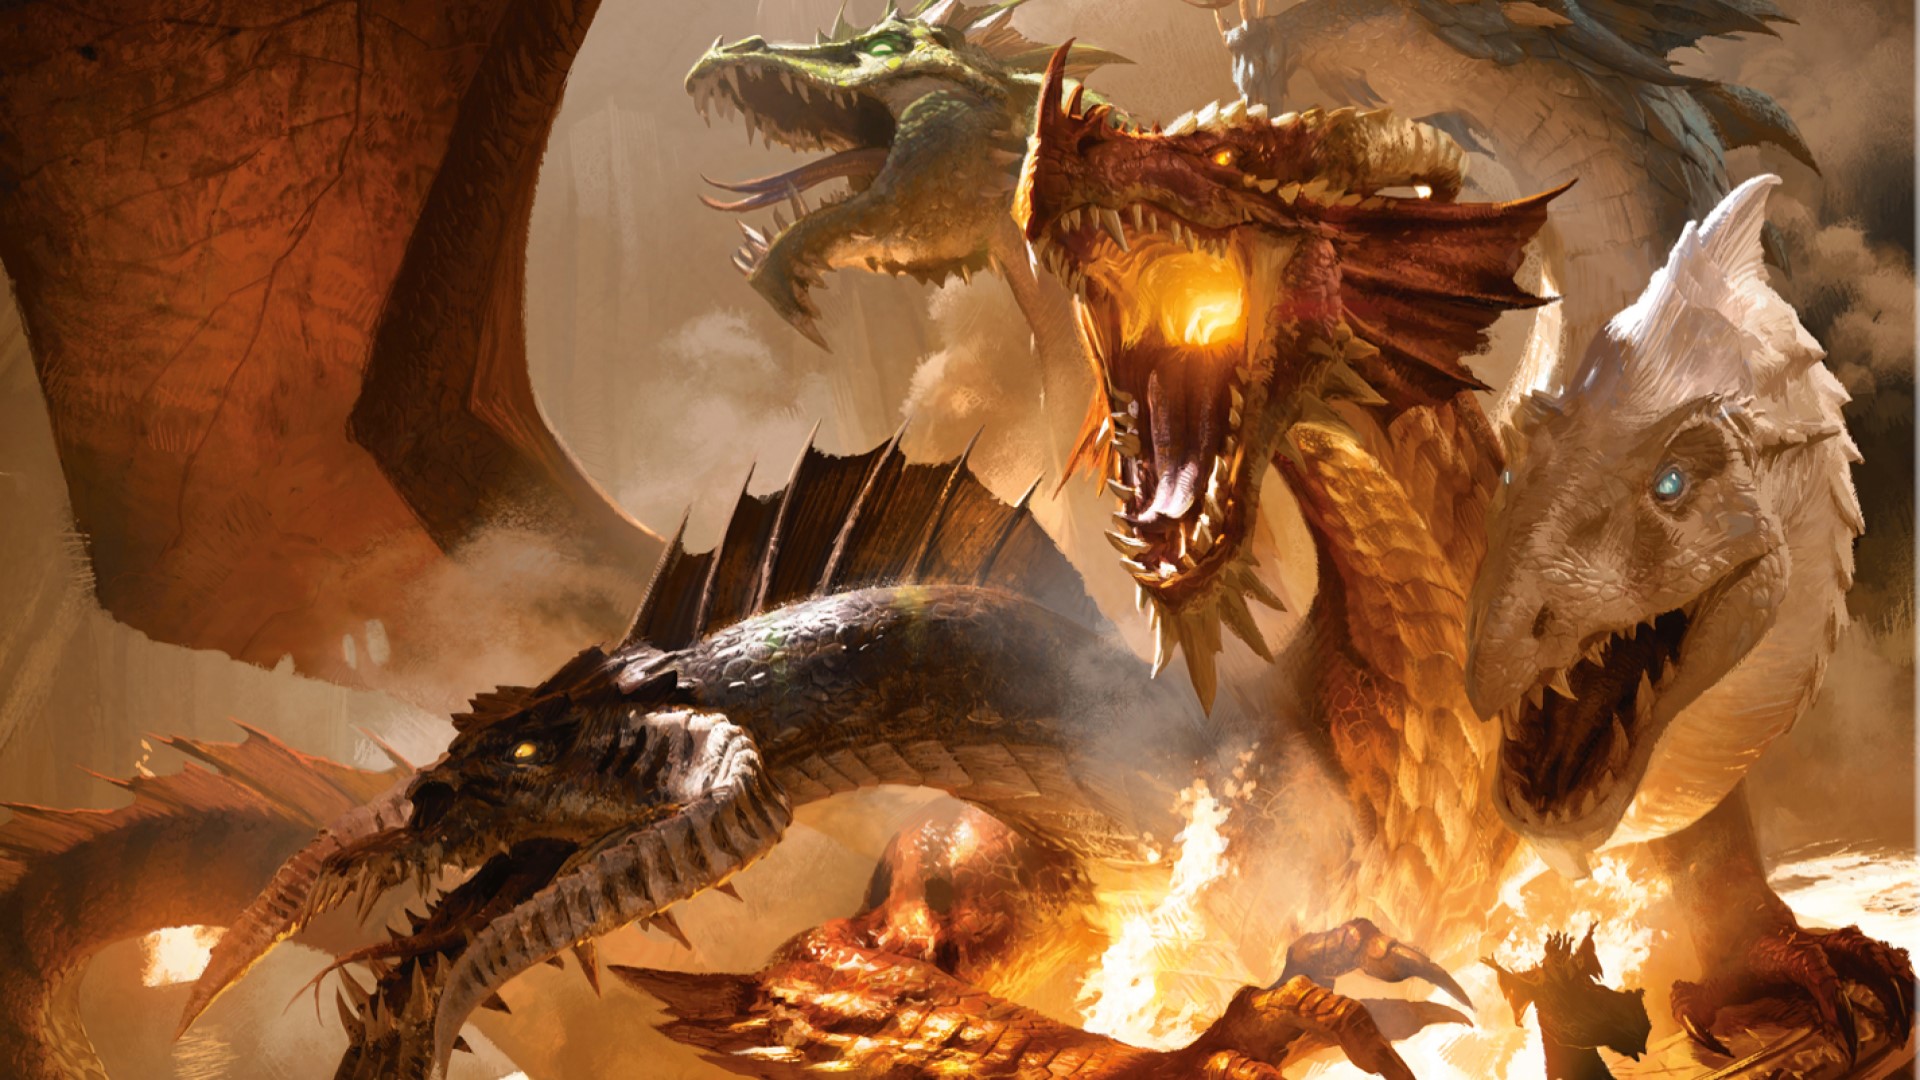 Best tabletop RPGs - dungeons and dragons artwork showing several huge dragons of different breeds breathing fire